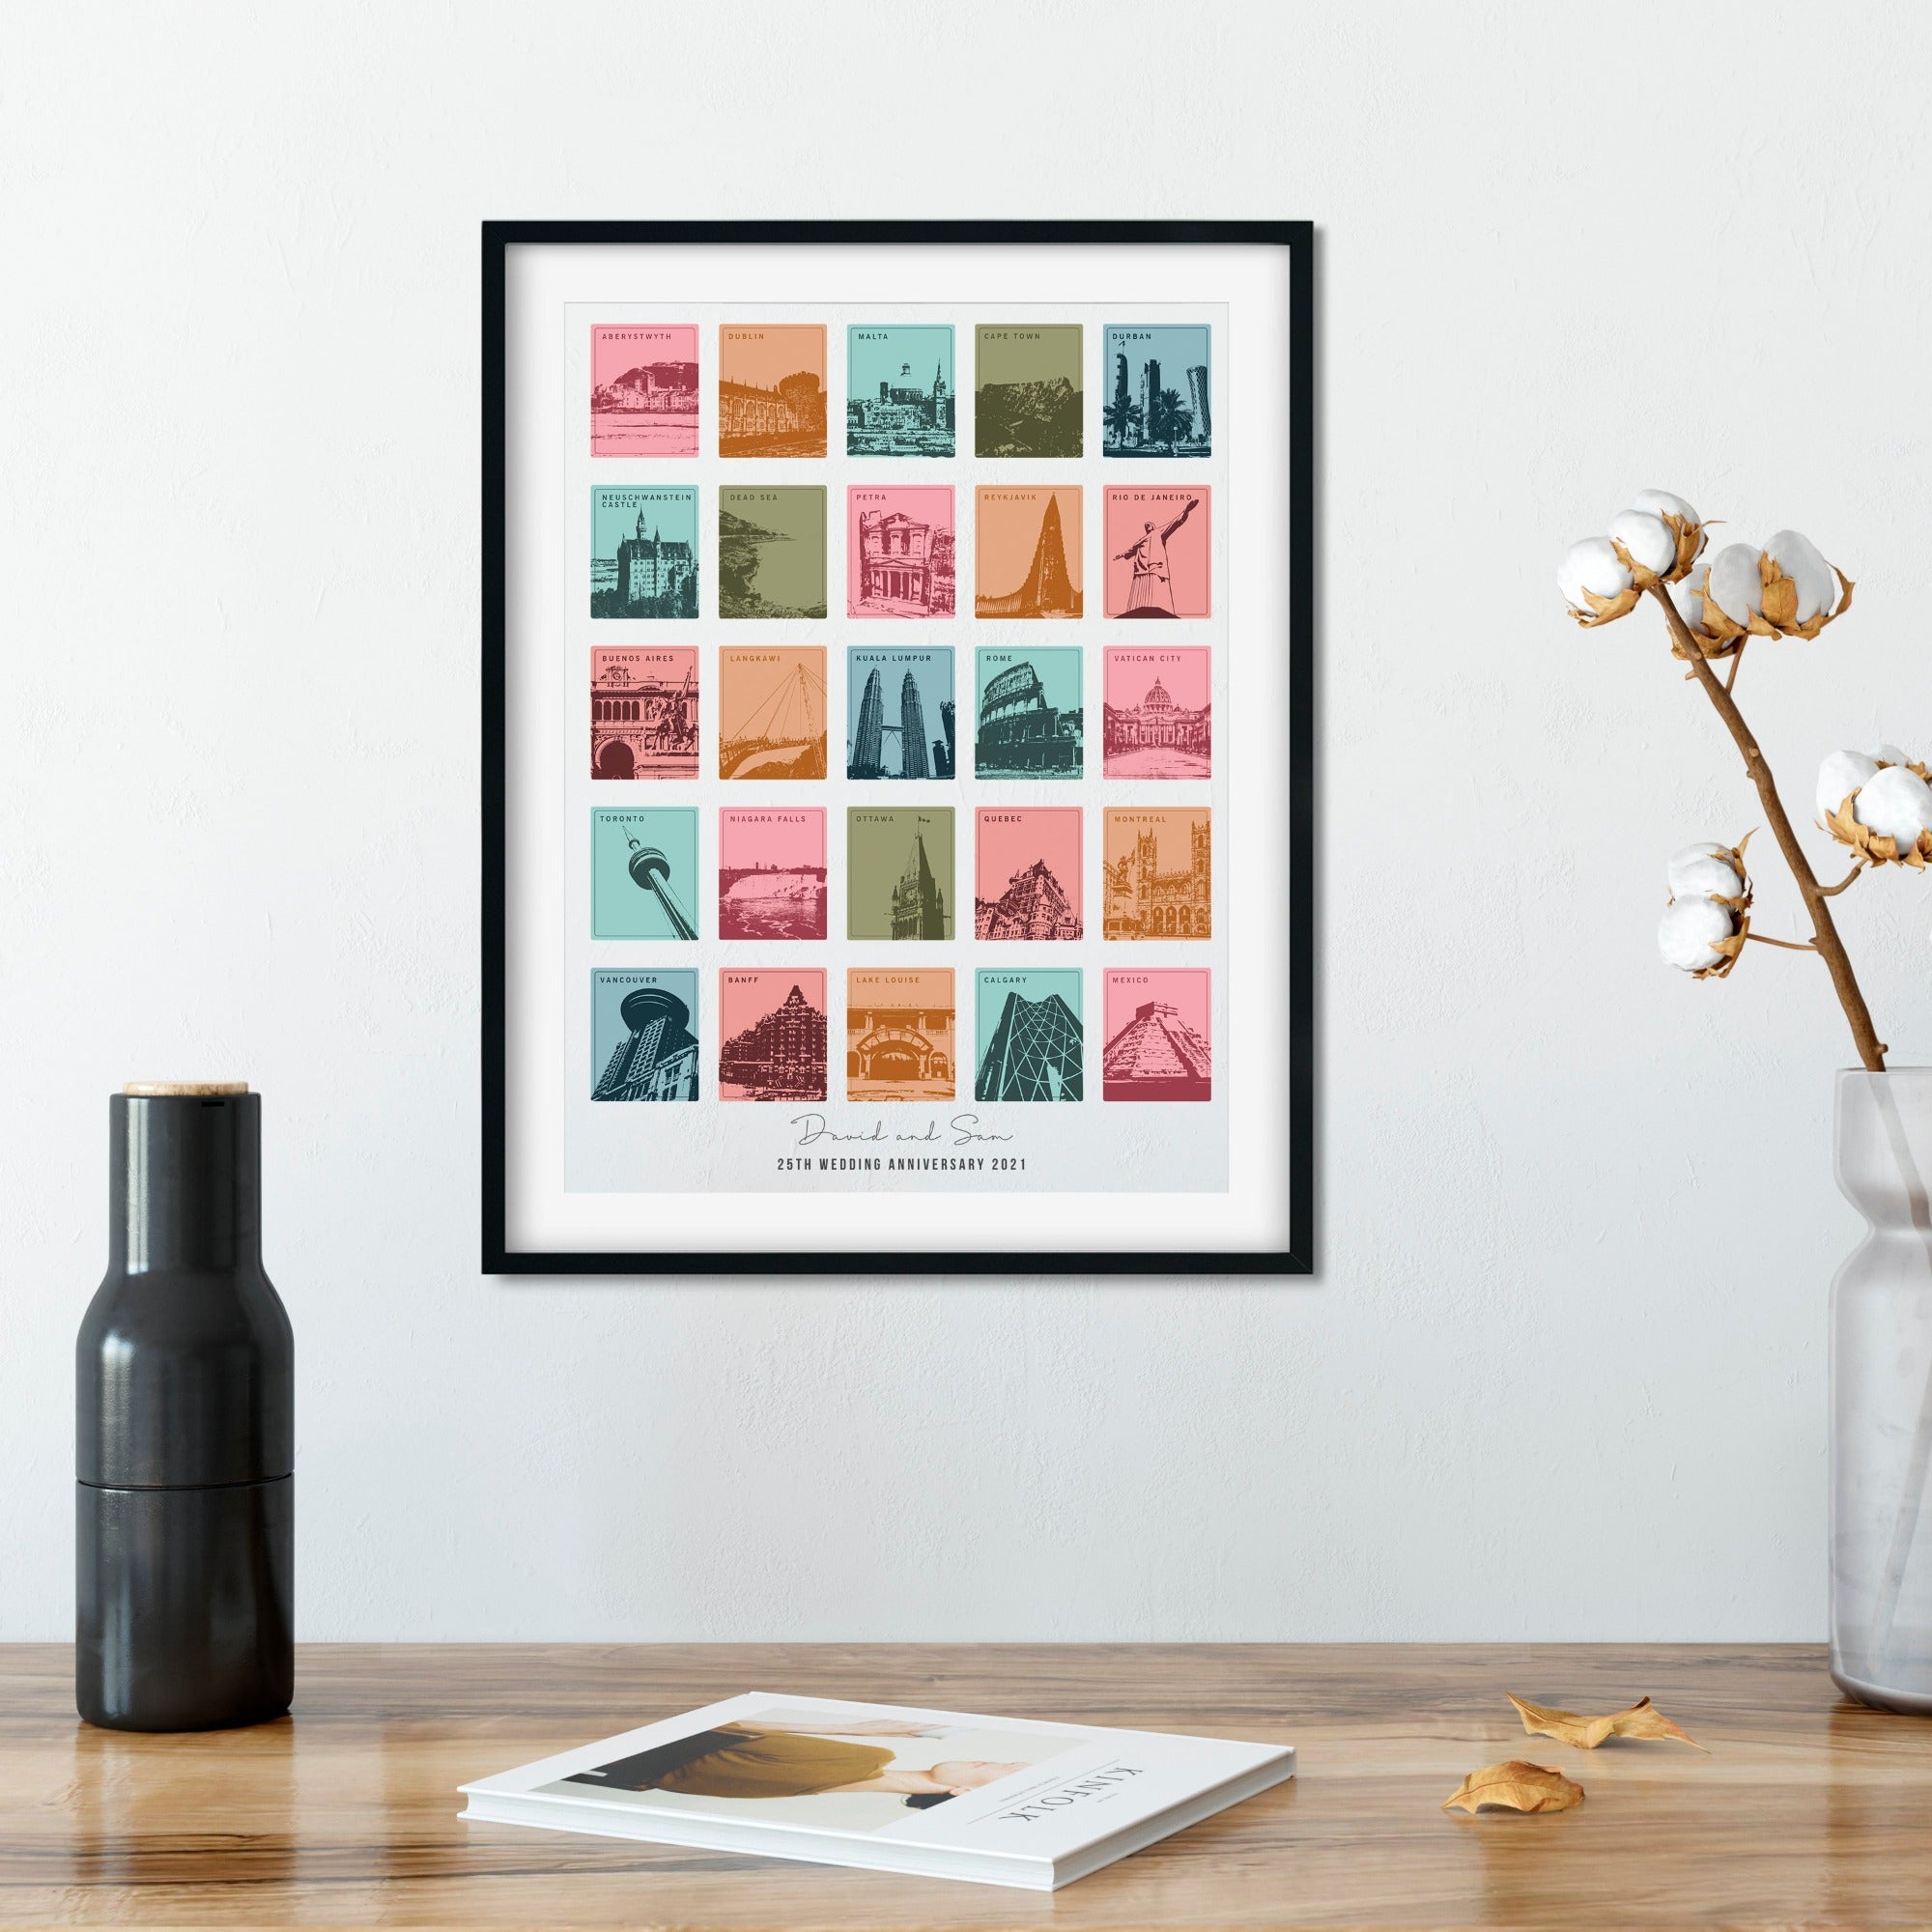 Black framed print showing 25 coloured images of various locations around the world in the summer colorway